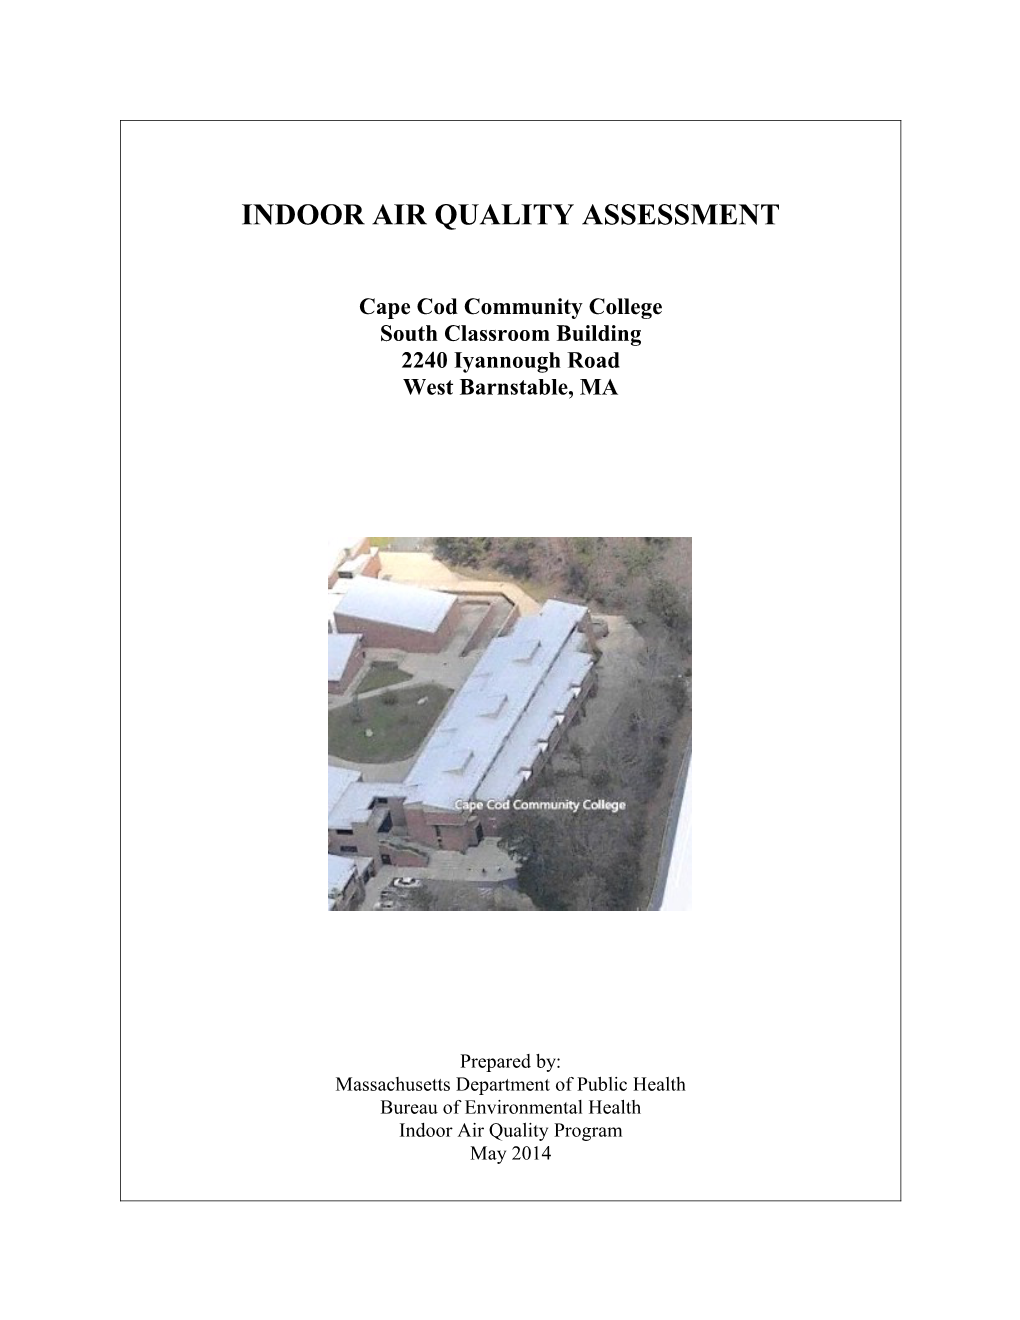 Indoor Air Quality Assessment s2